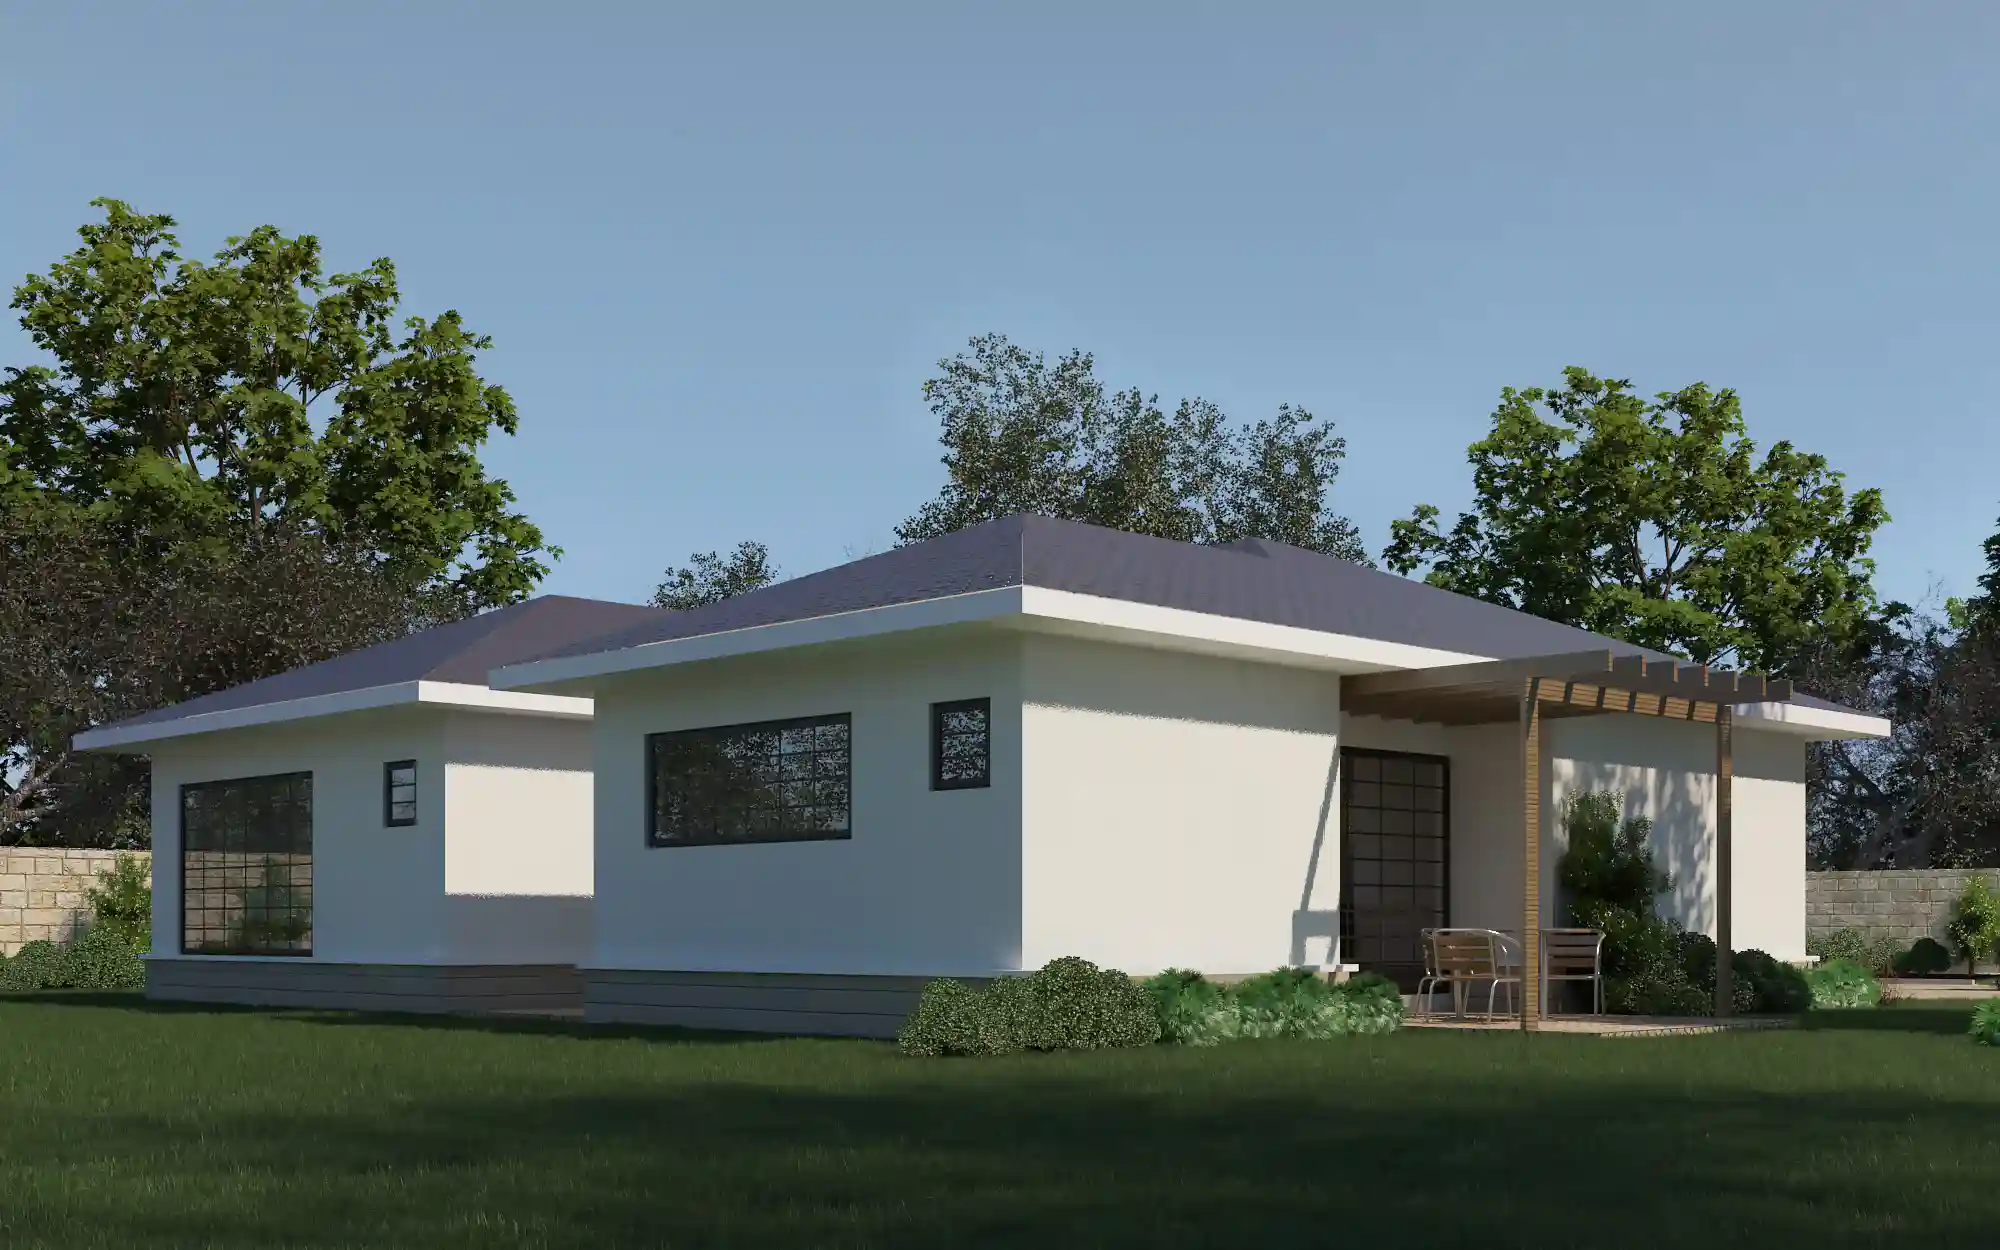 4 Bedroom Bungalow -ID 4111 - 4 BED BNGL TP1 OP1 REAR.jpg from Inuua Tujenge house plans with 4 bedrooms and 2 bathrooms. ( bungalow )